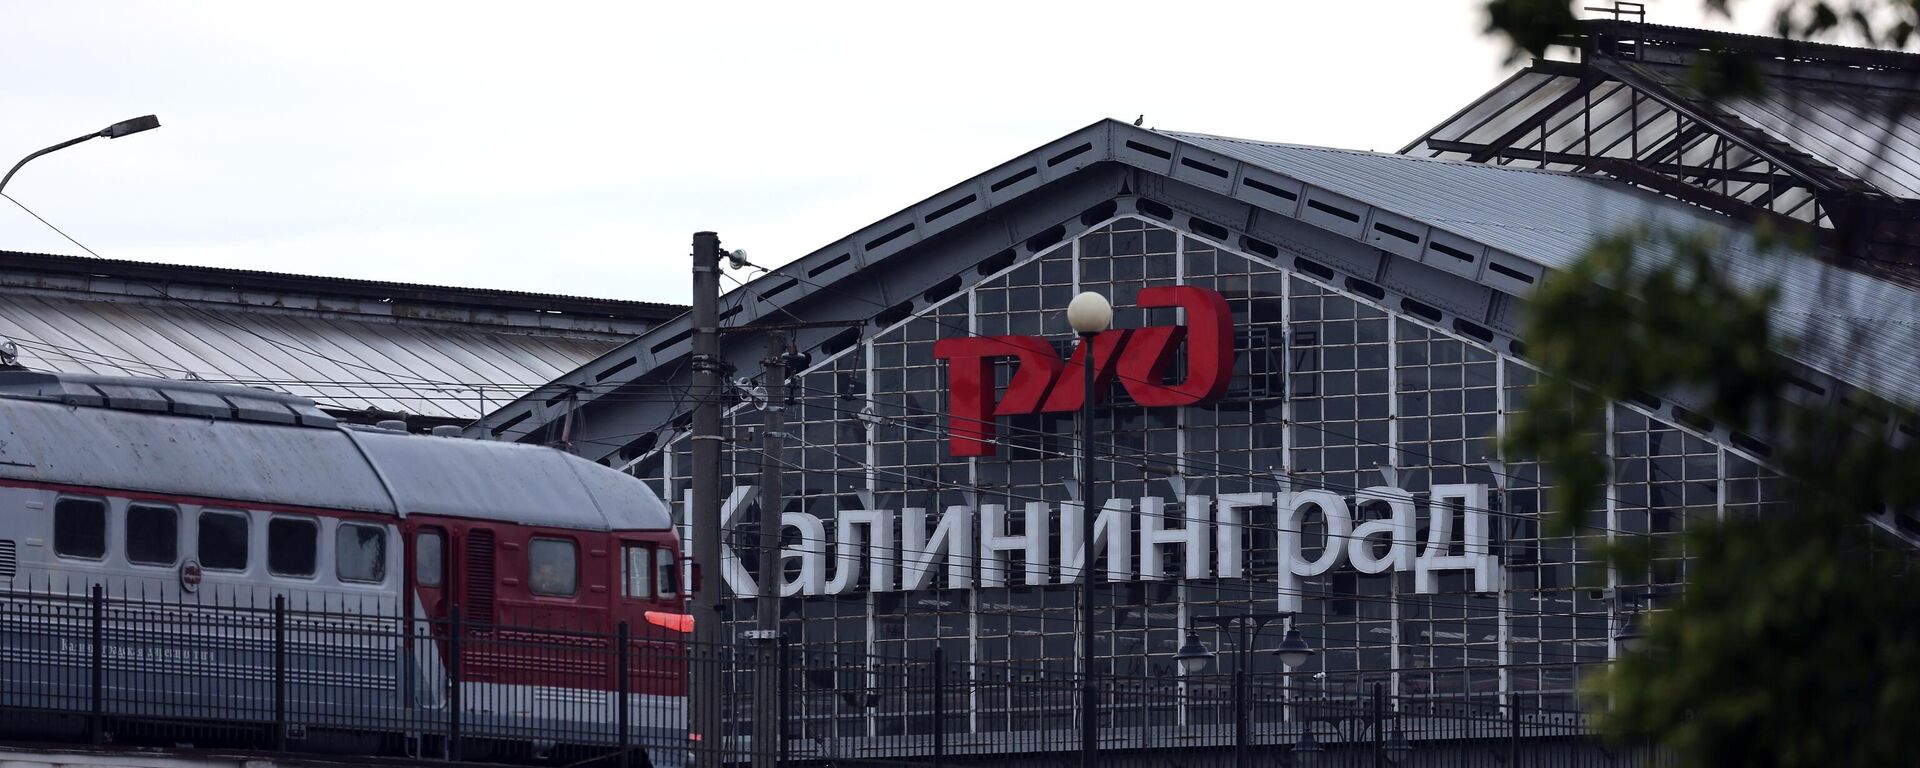 The logo of the Rassian Railways and inscription Kaliningrad are seen on the roof gable of the railway station in Kaliningrad, Russia. Lithuania says ban on rail cargo transit from Russia to Kaliningrad directed by EU. - Sputnik International, 1920, 14.07.2022